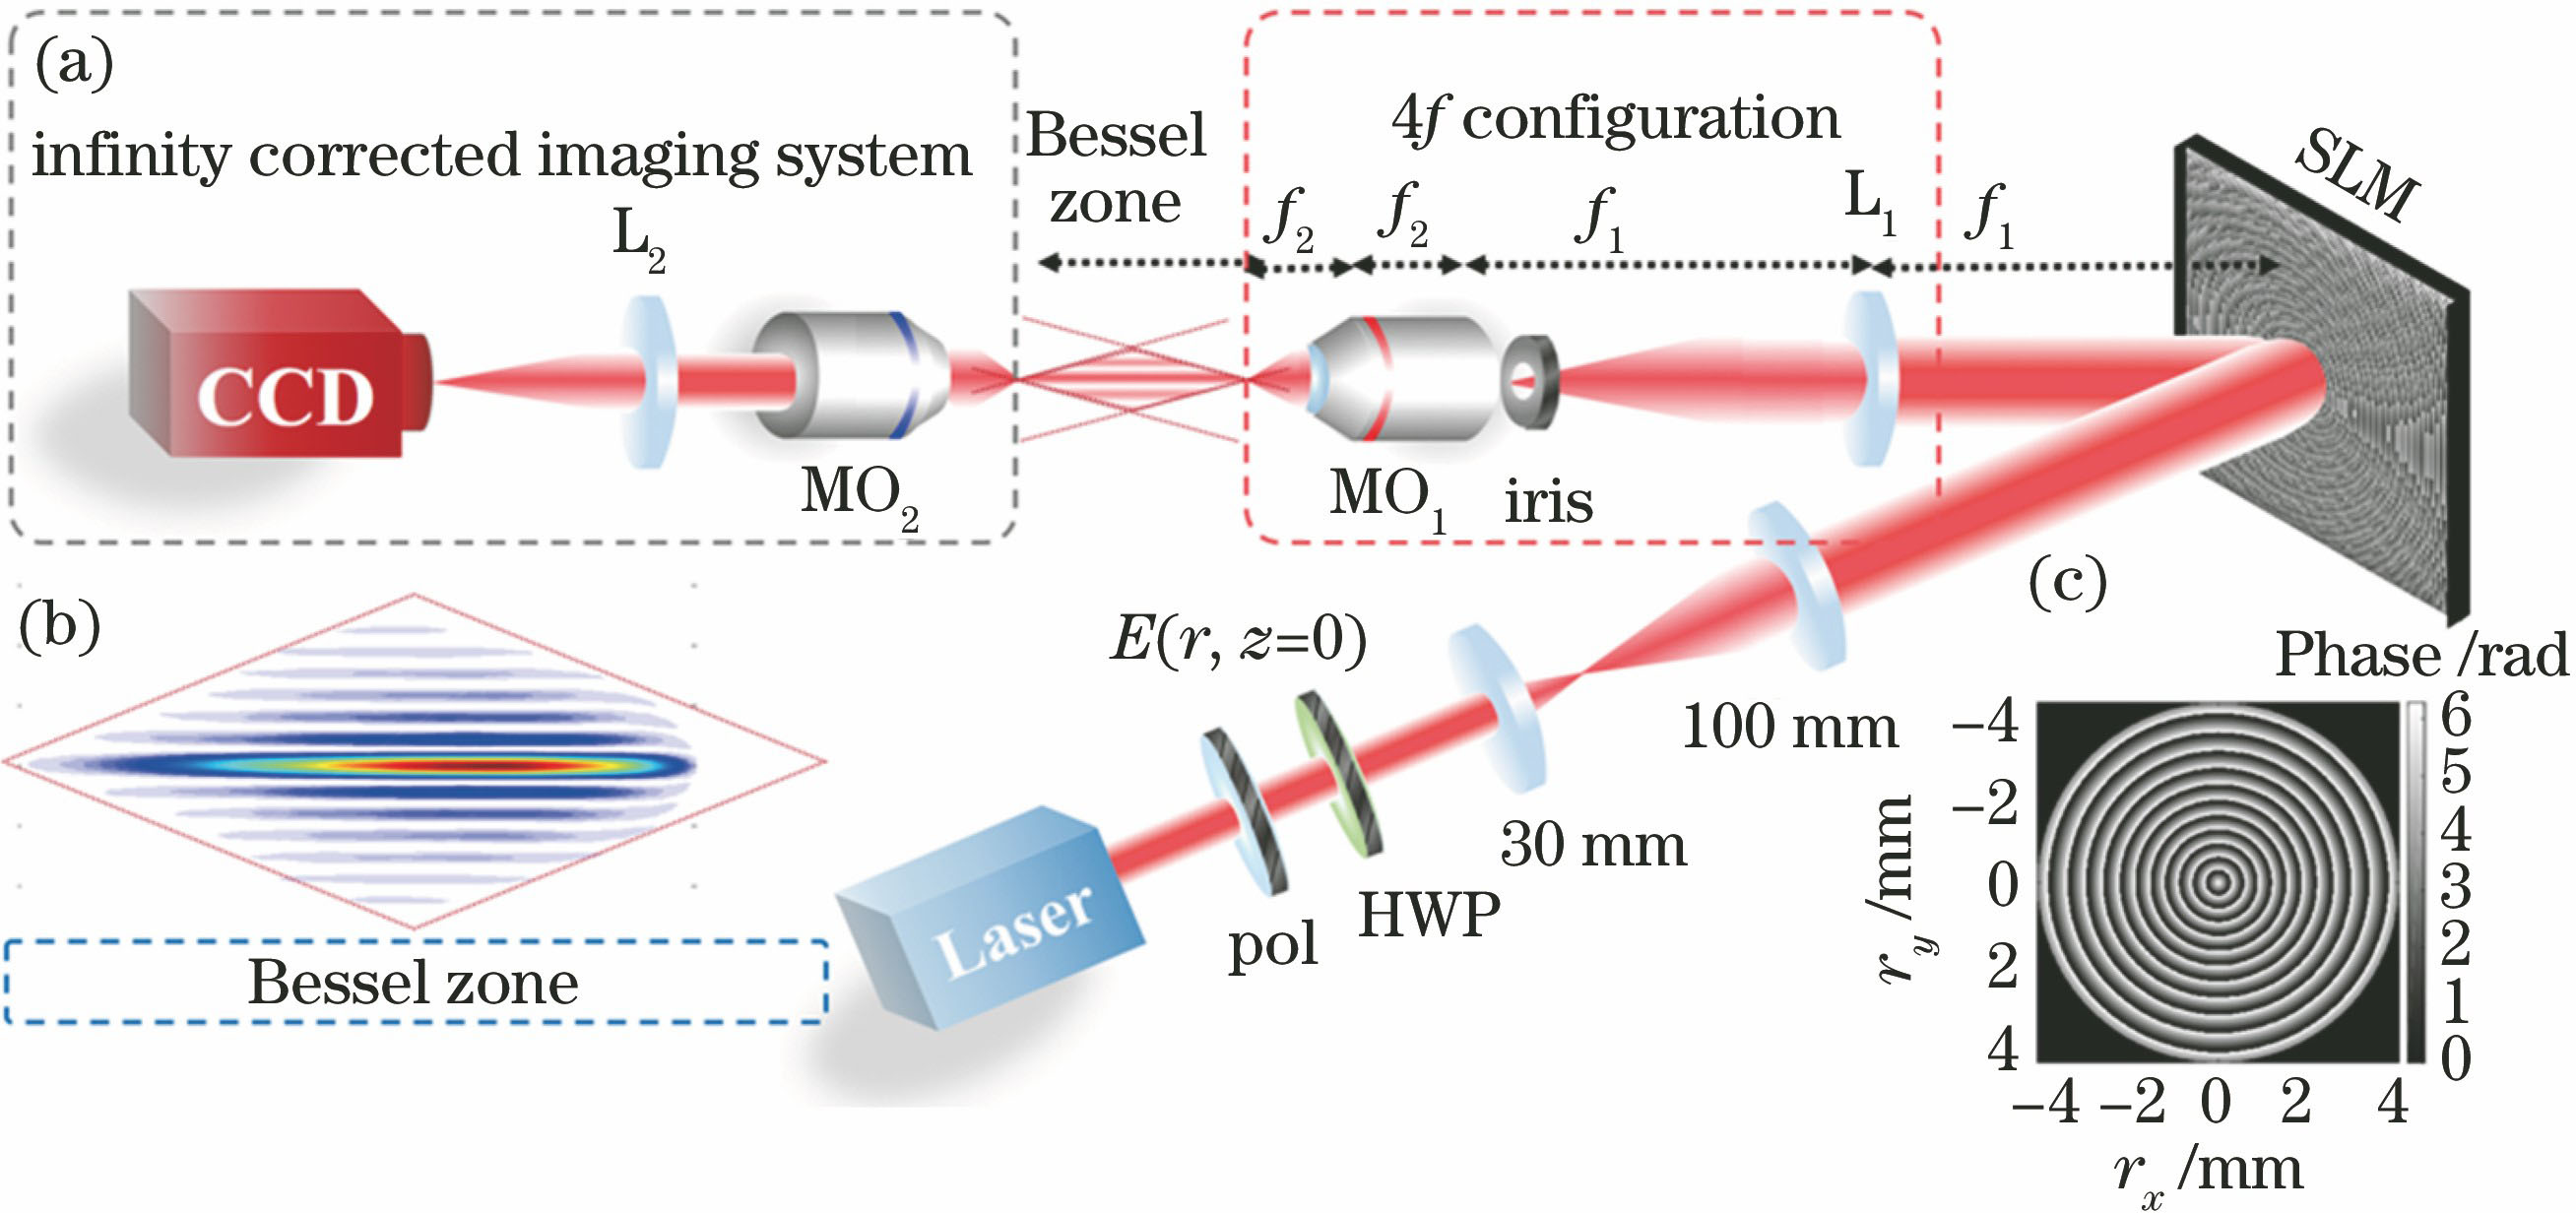 Generation of the Bessel beam by SLM in the direct space. (a) Experimental setup; (b) simulated evolution of the non-diffracting Bessel beam along propagation in the Bessel zone; (c) phase mask loaded on SLM panel